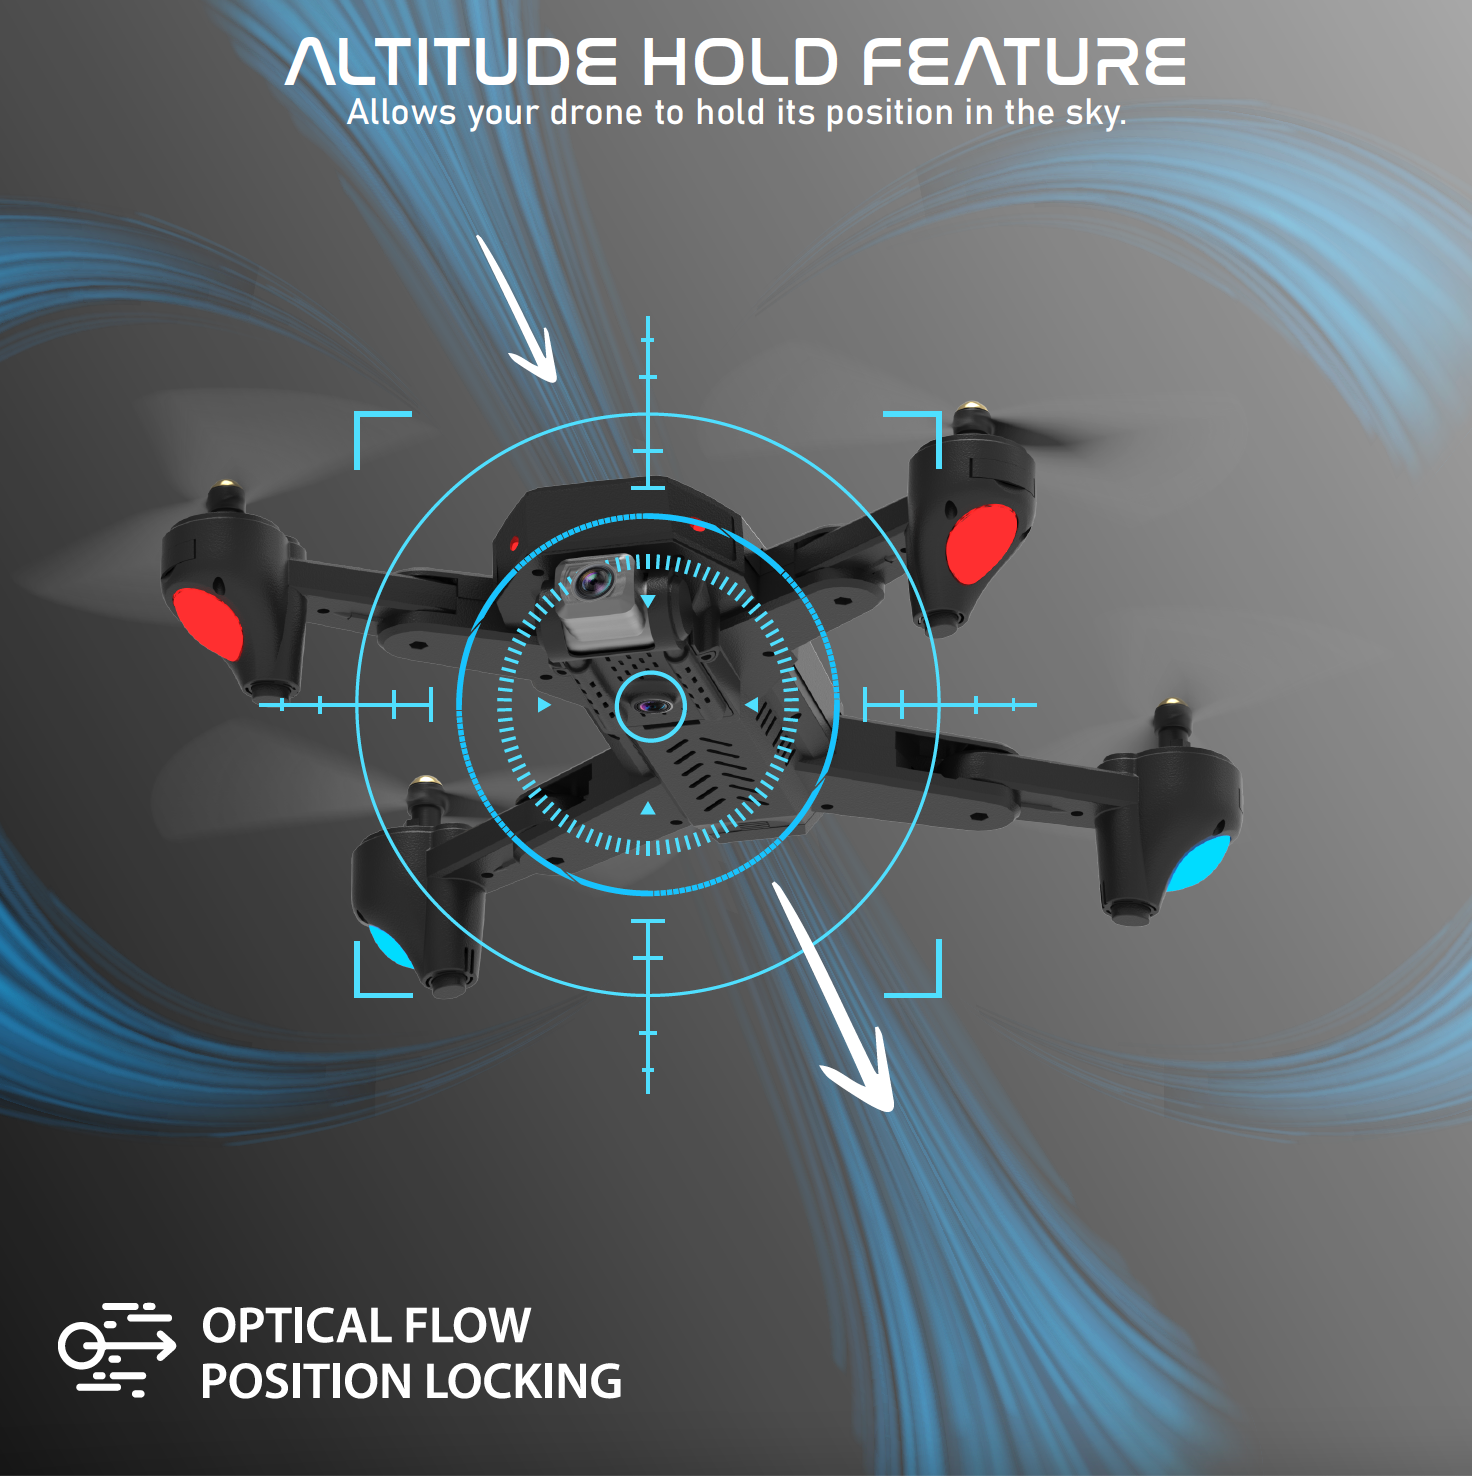 garuda altitude hold drone great stability drone position locking